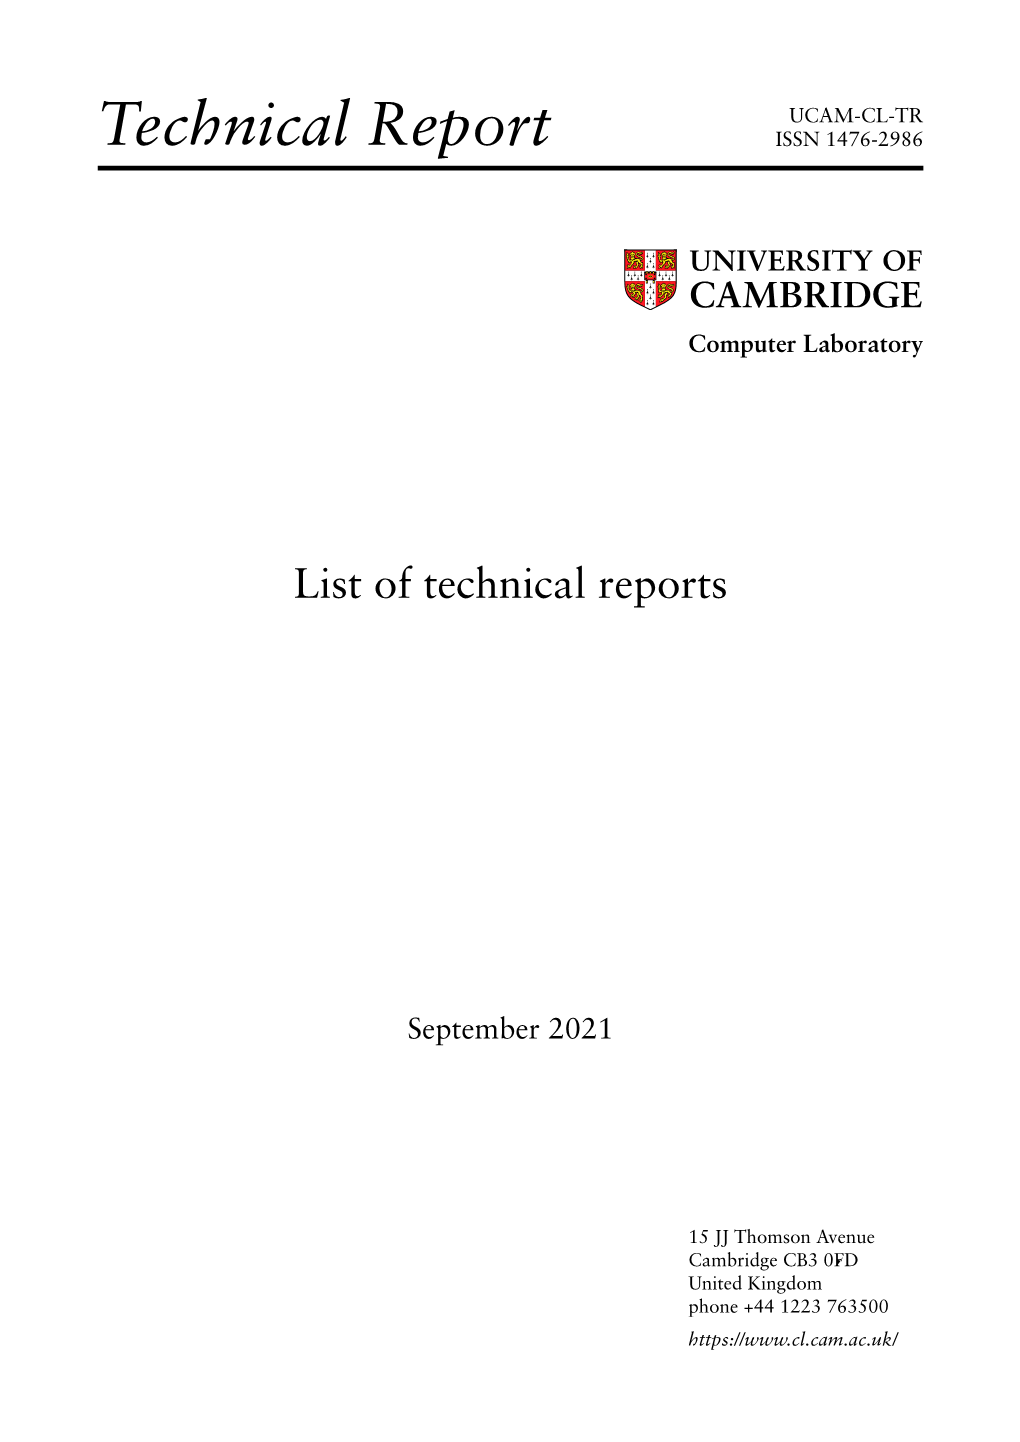 List of Technical Reports